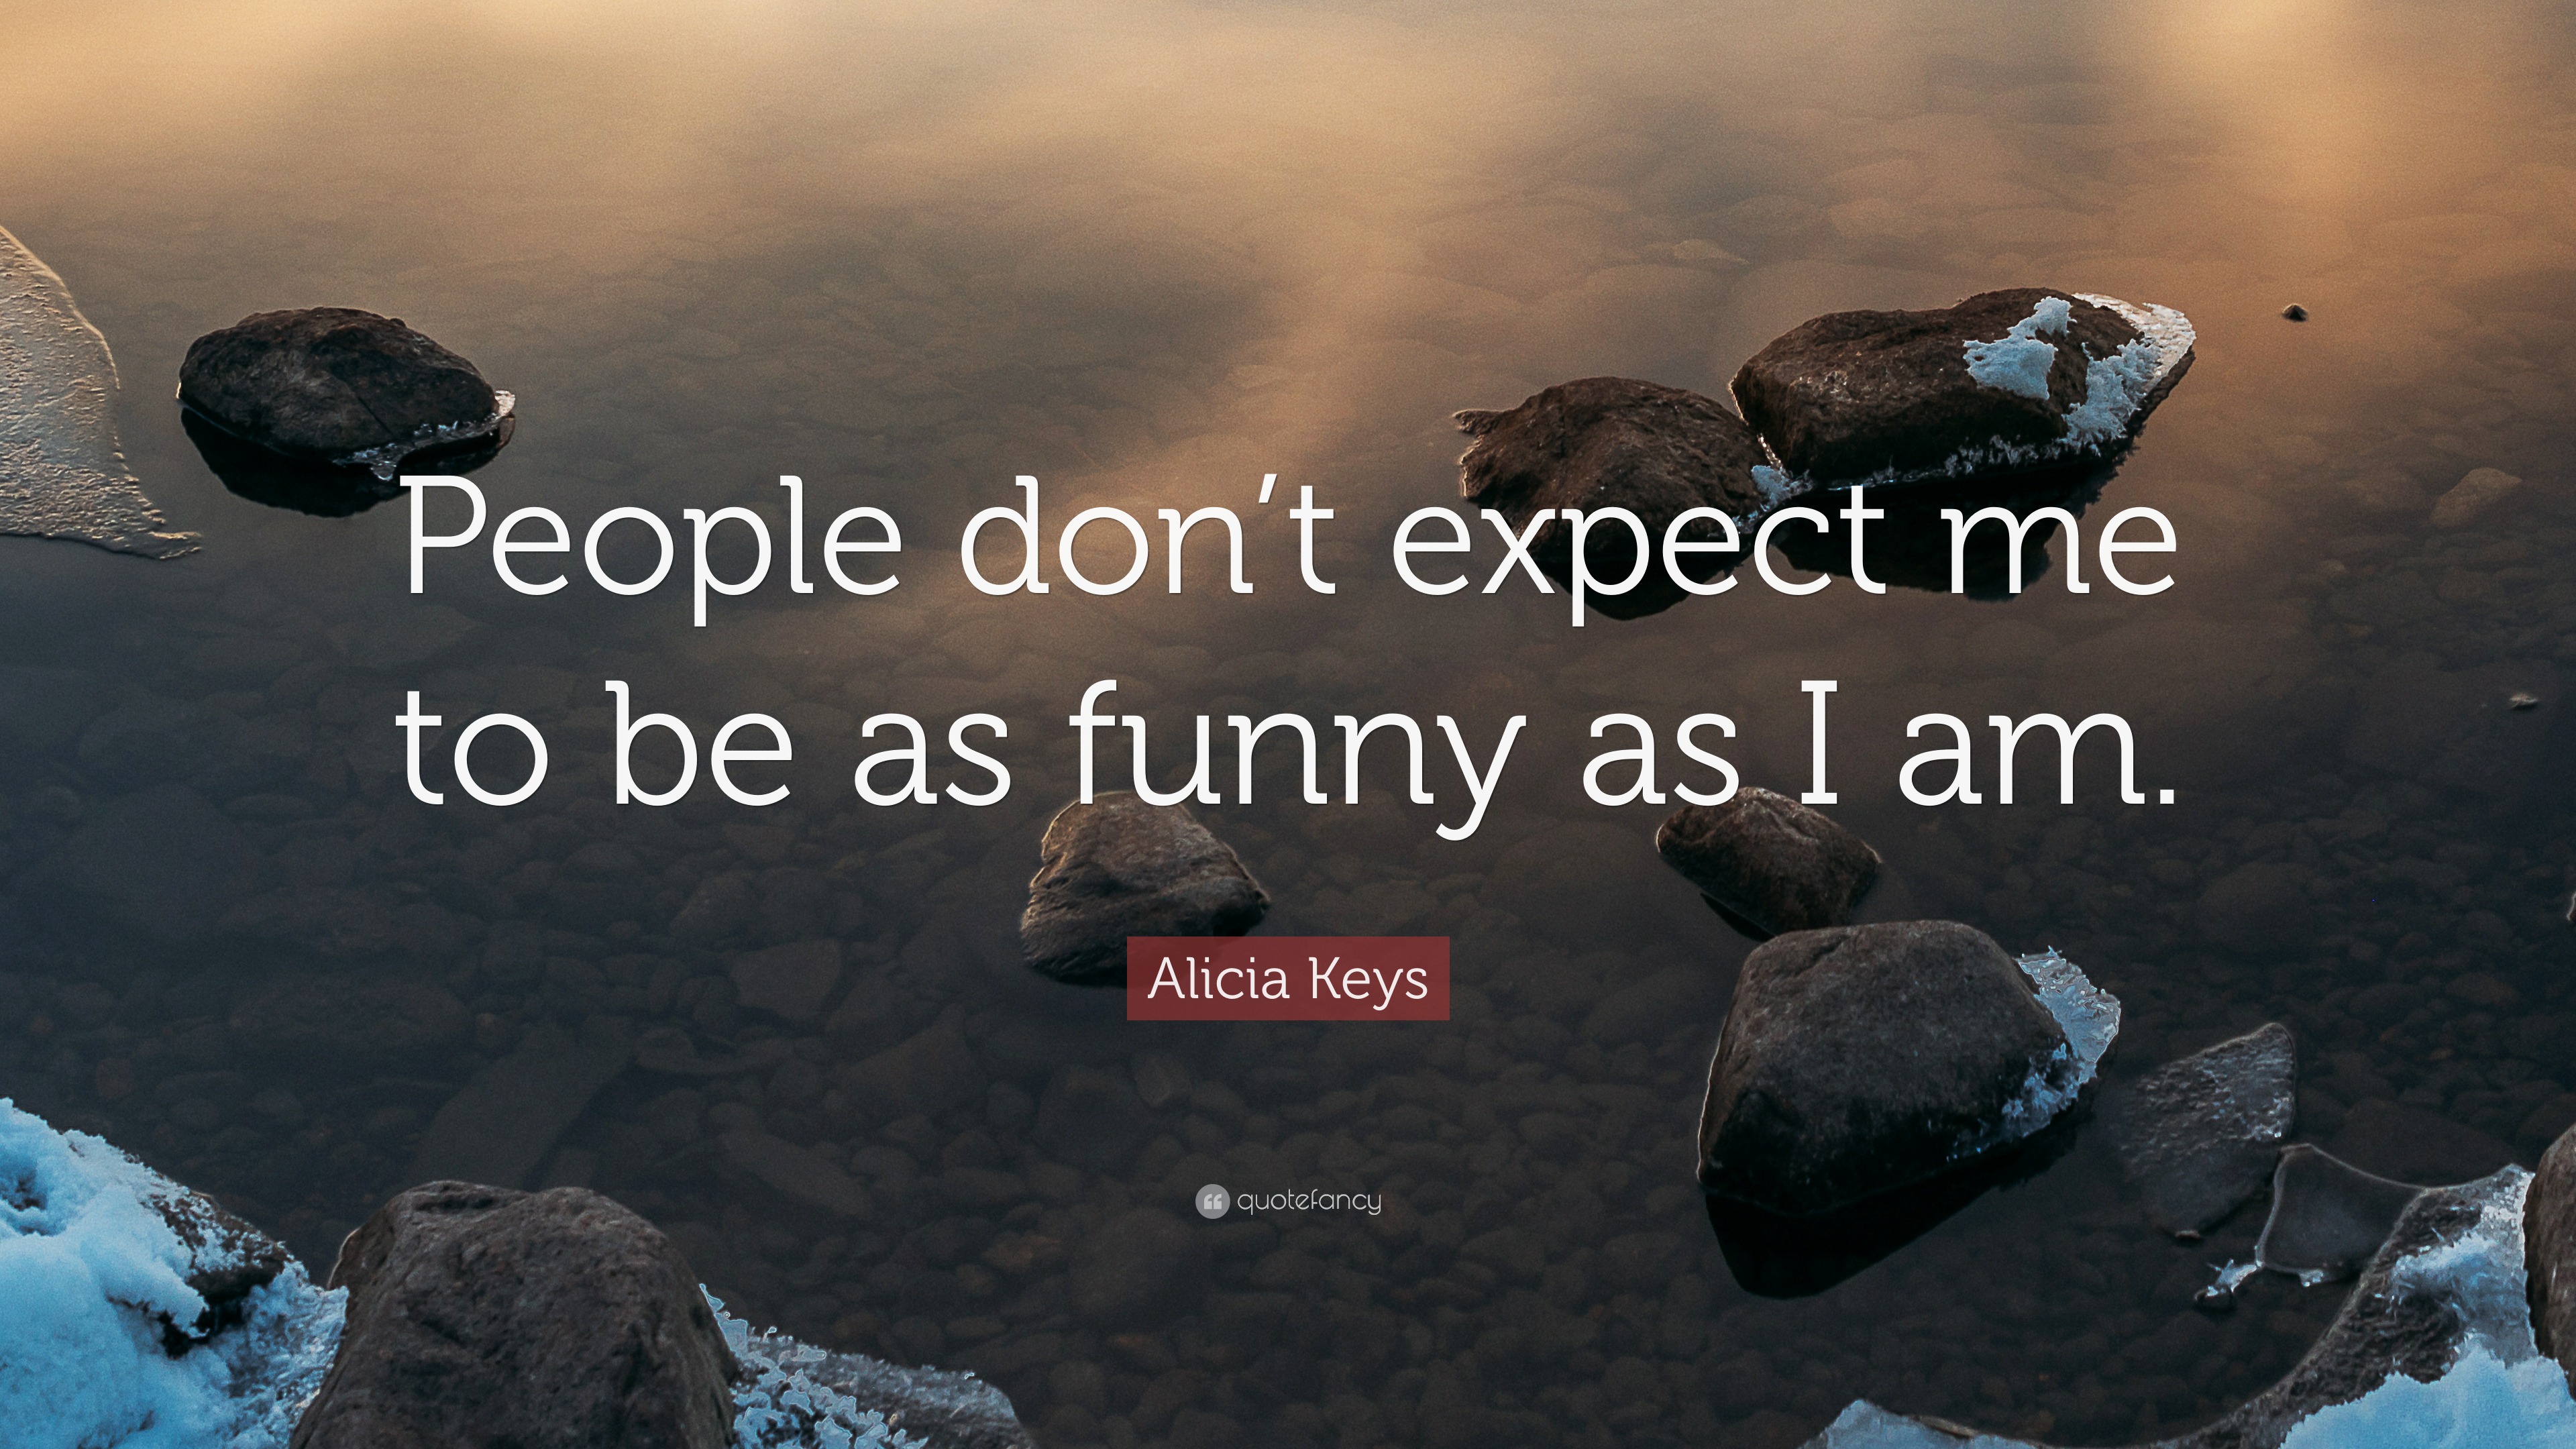 Alicia Keys Quote: “People don't expect me to be as funny as I am.”